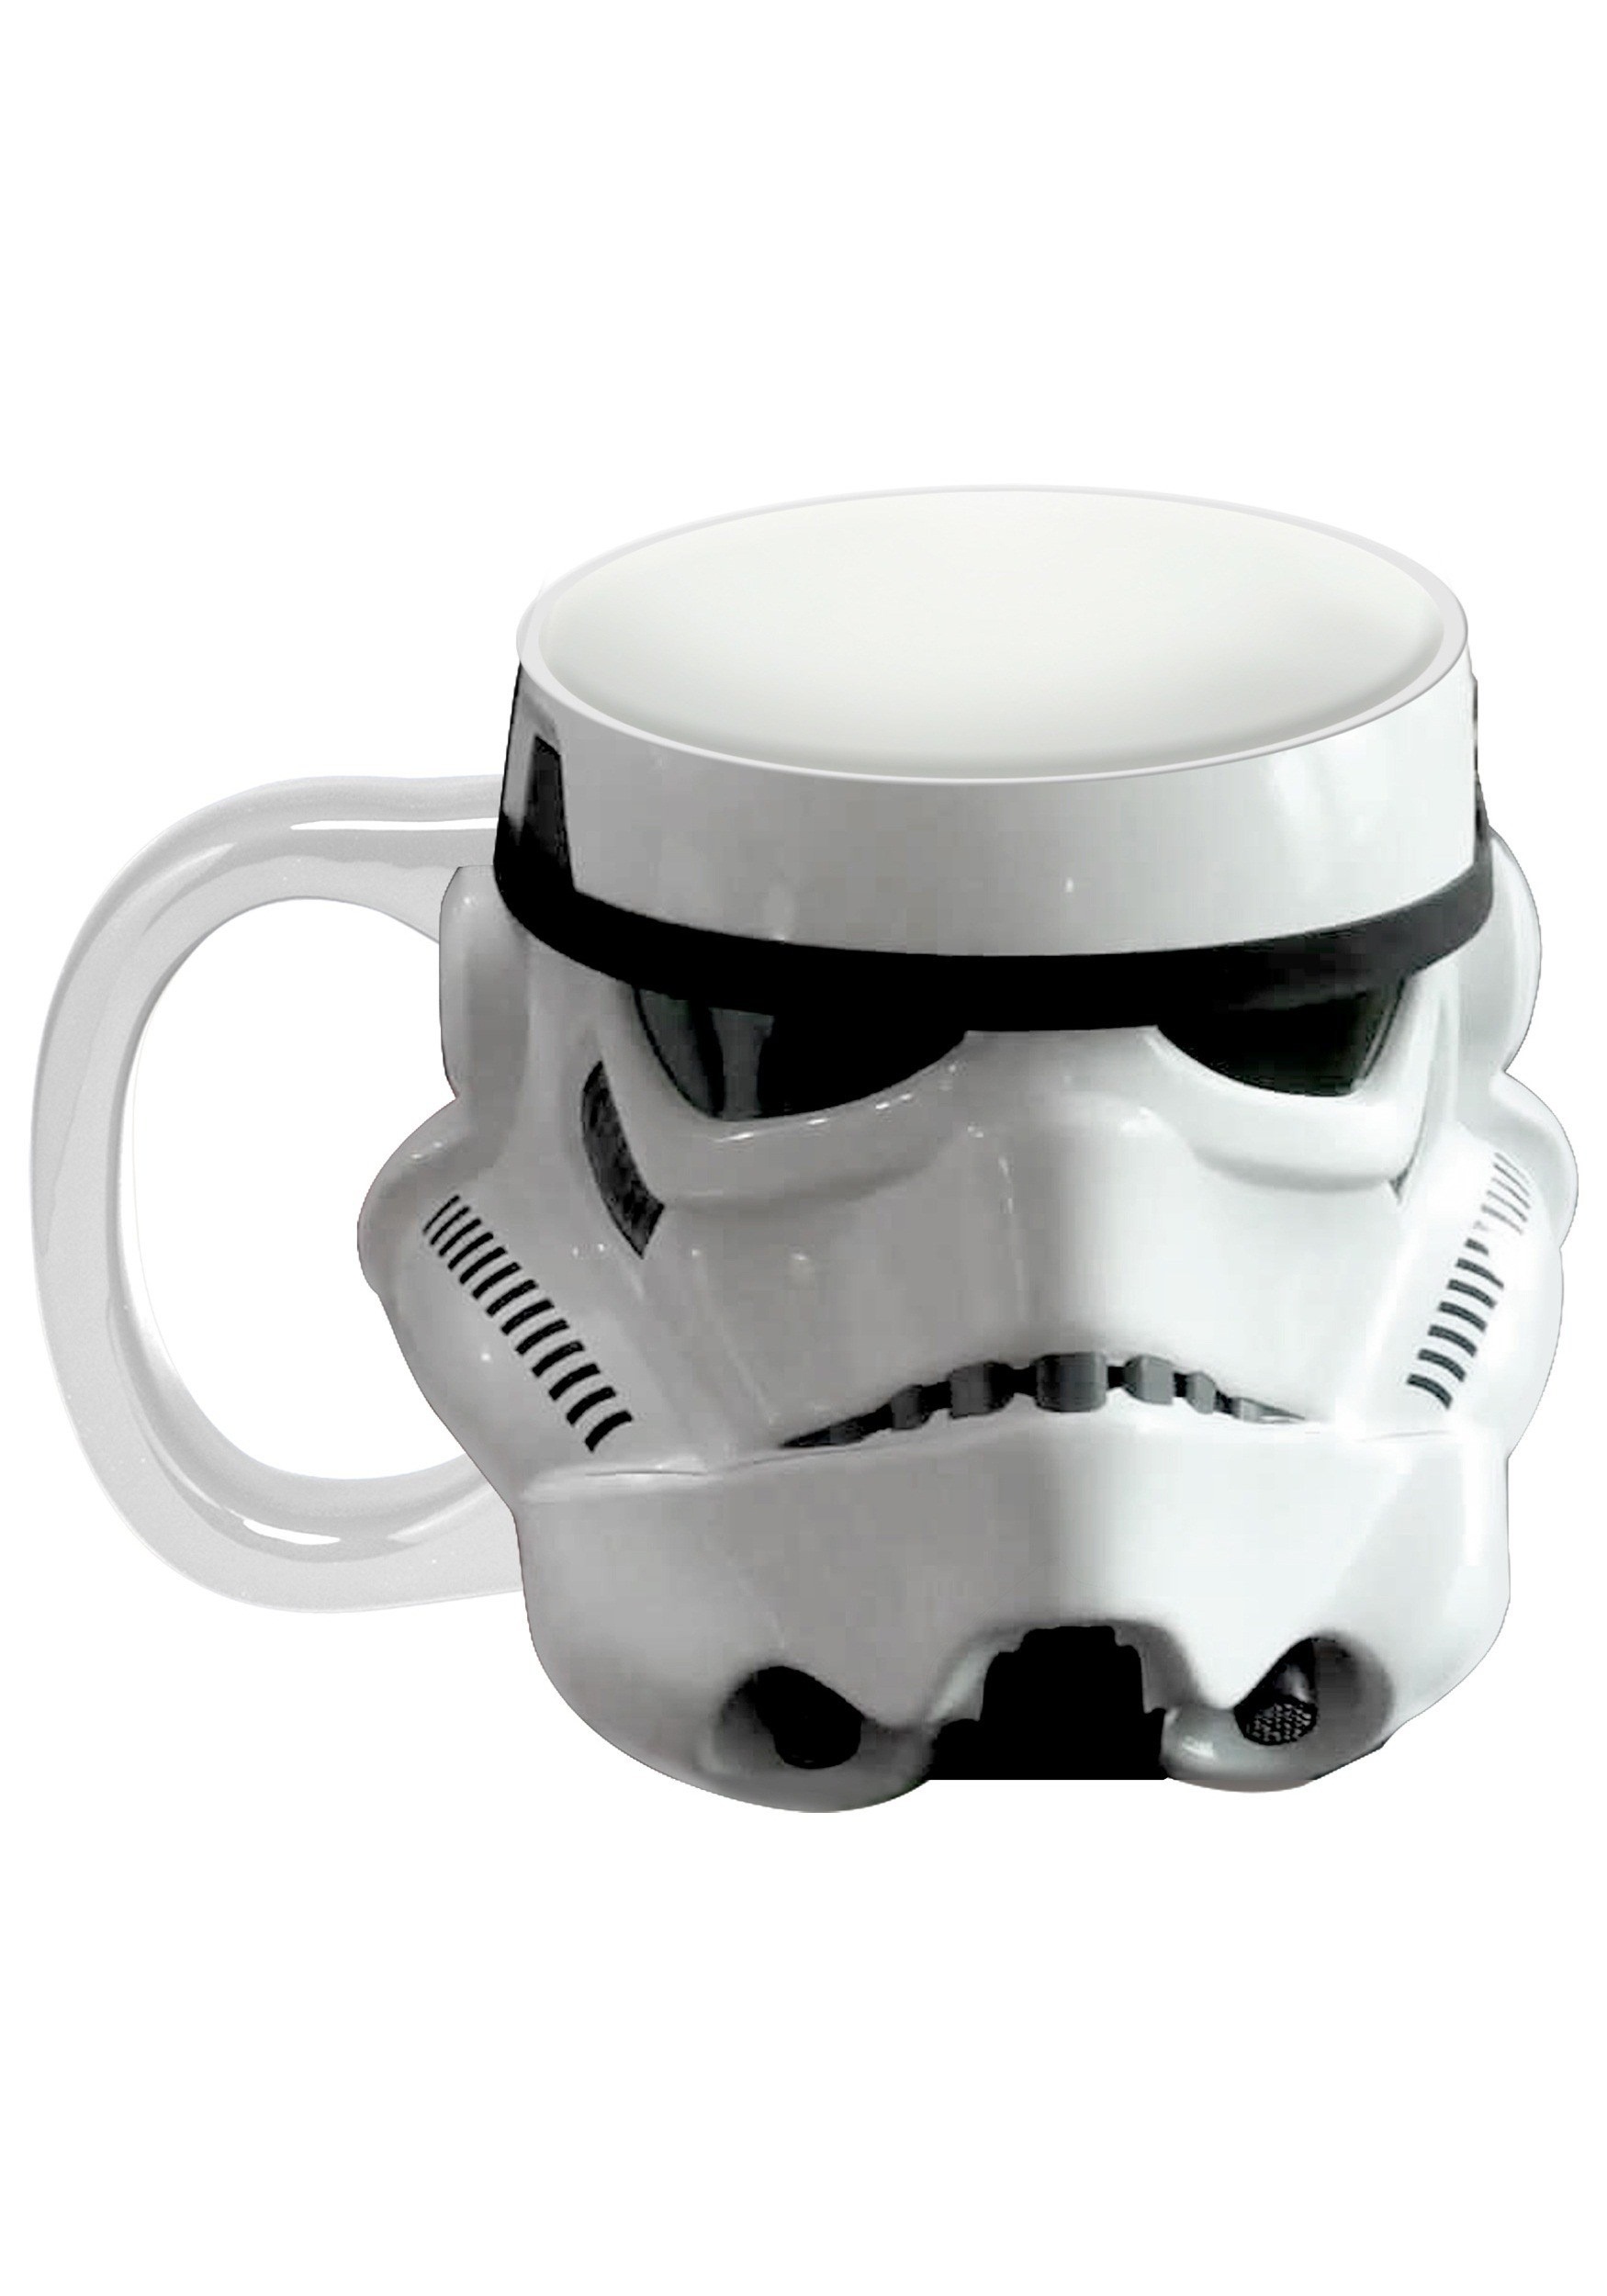 Disney brand new boxed gift STAR WARS STORMTROOPER MUG WITH 2D RELIEF DETAIL 